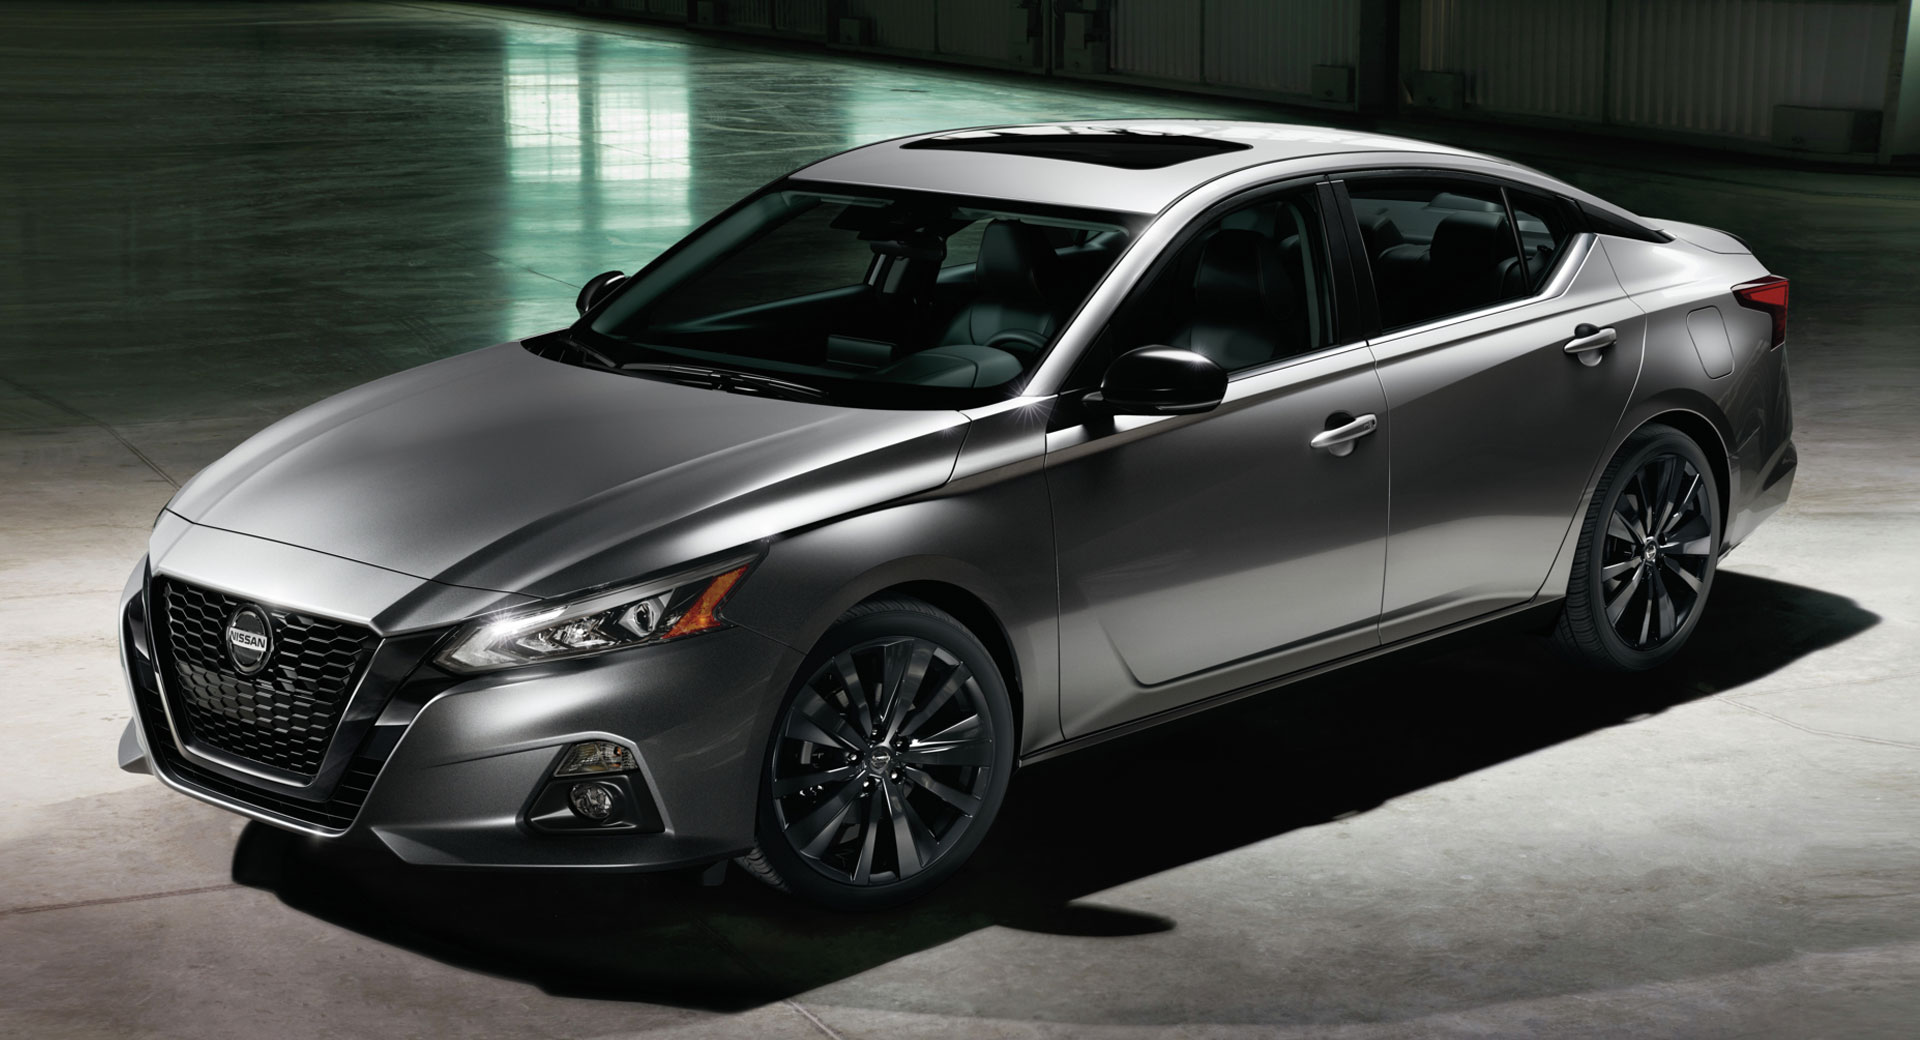 2022 Nissan Altima Goes Dark With New Midnight Edition Carscoops